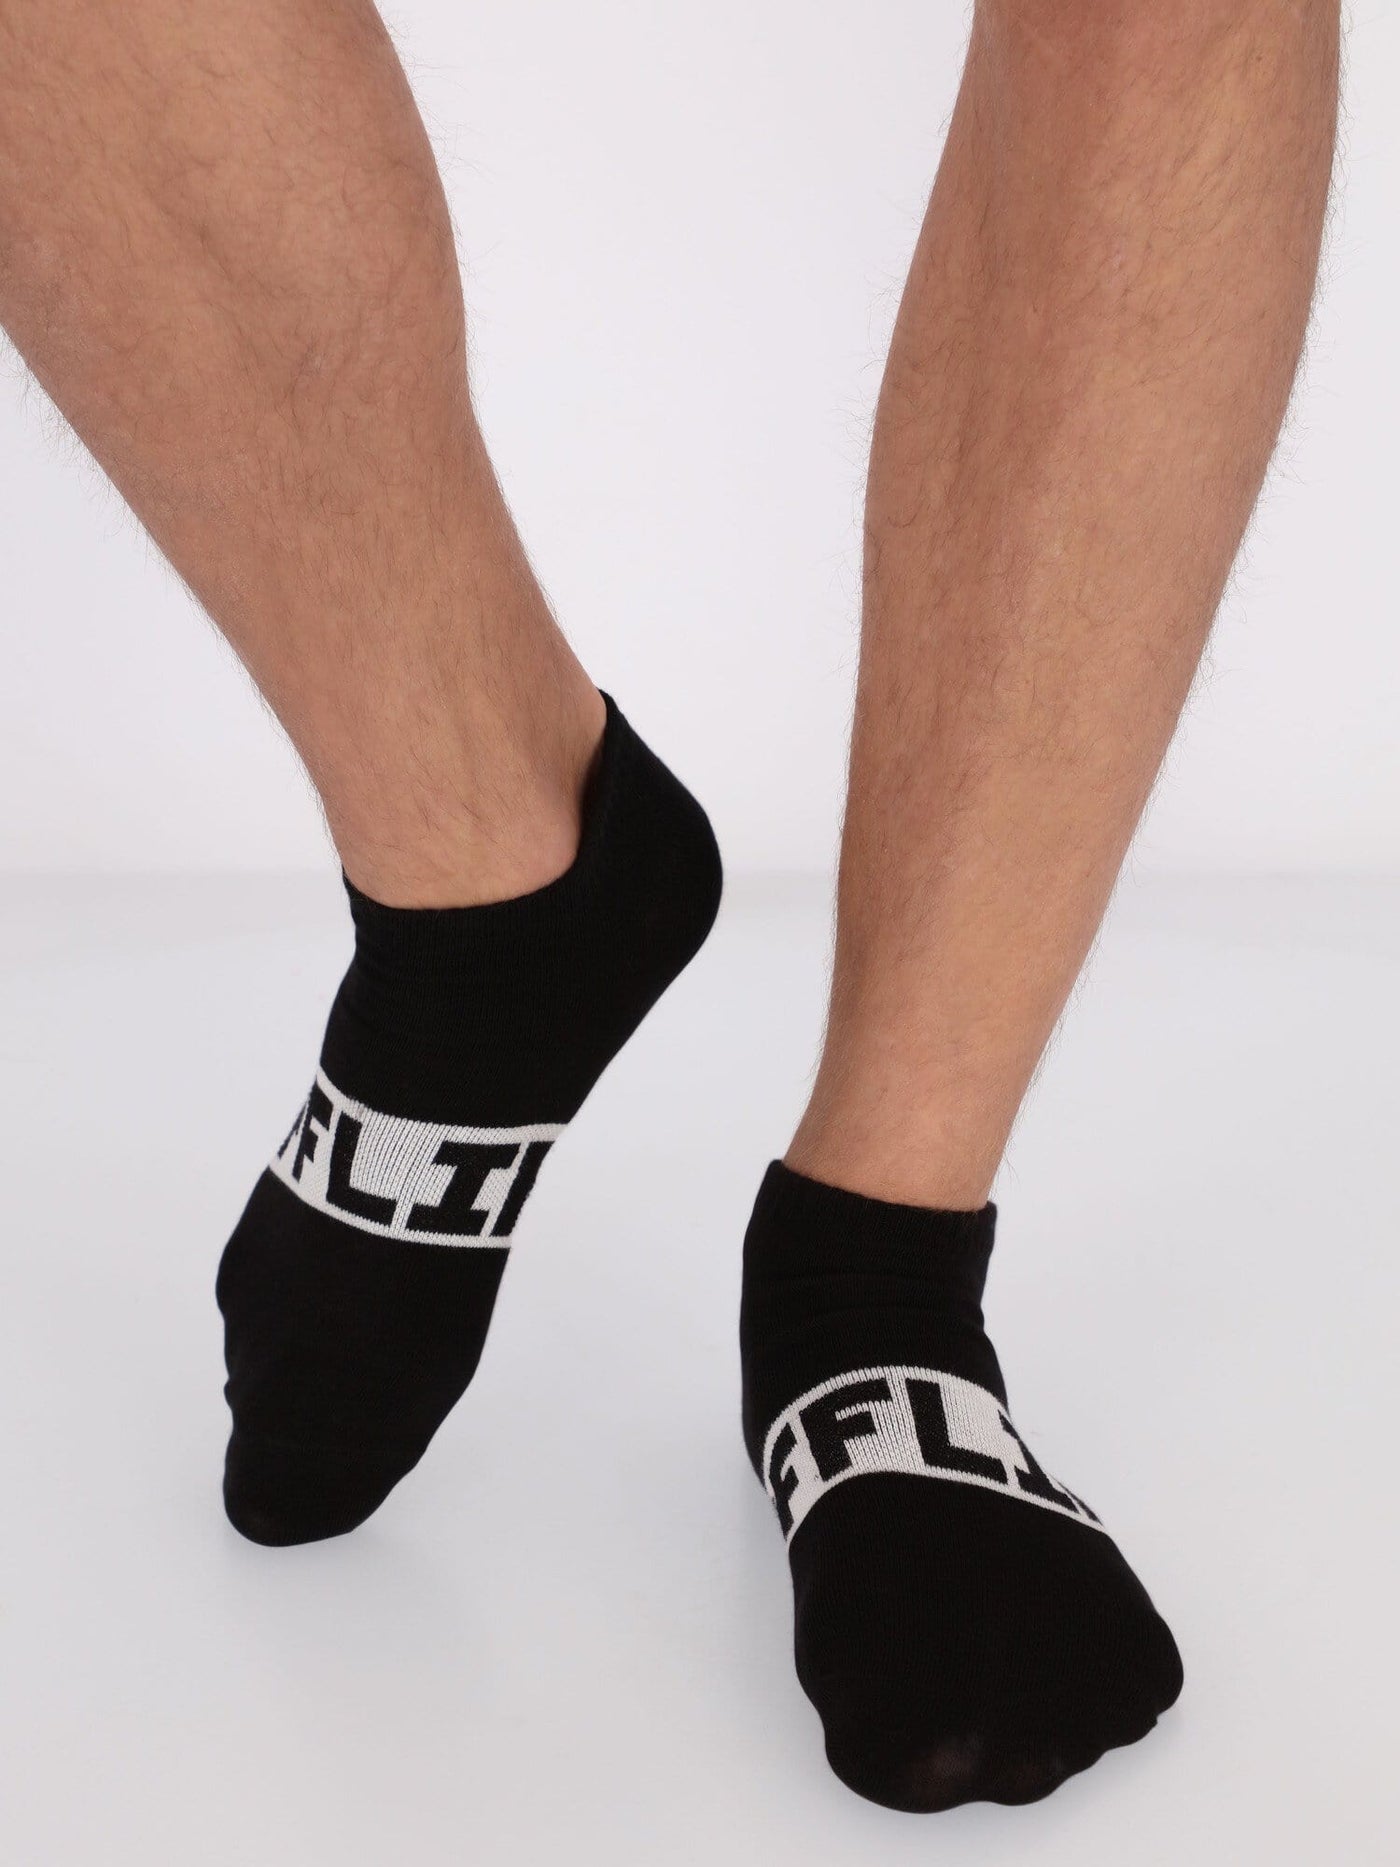 OR Other Accessories WHITE / Os 3 Pairs Offline Low Cut Socks